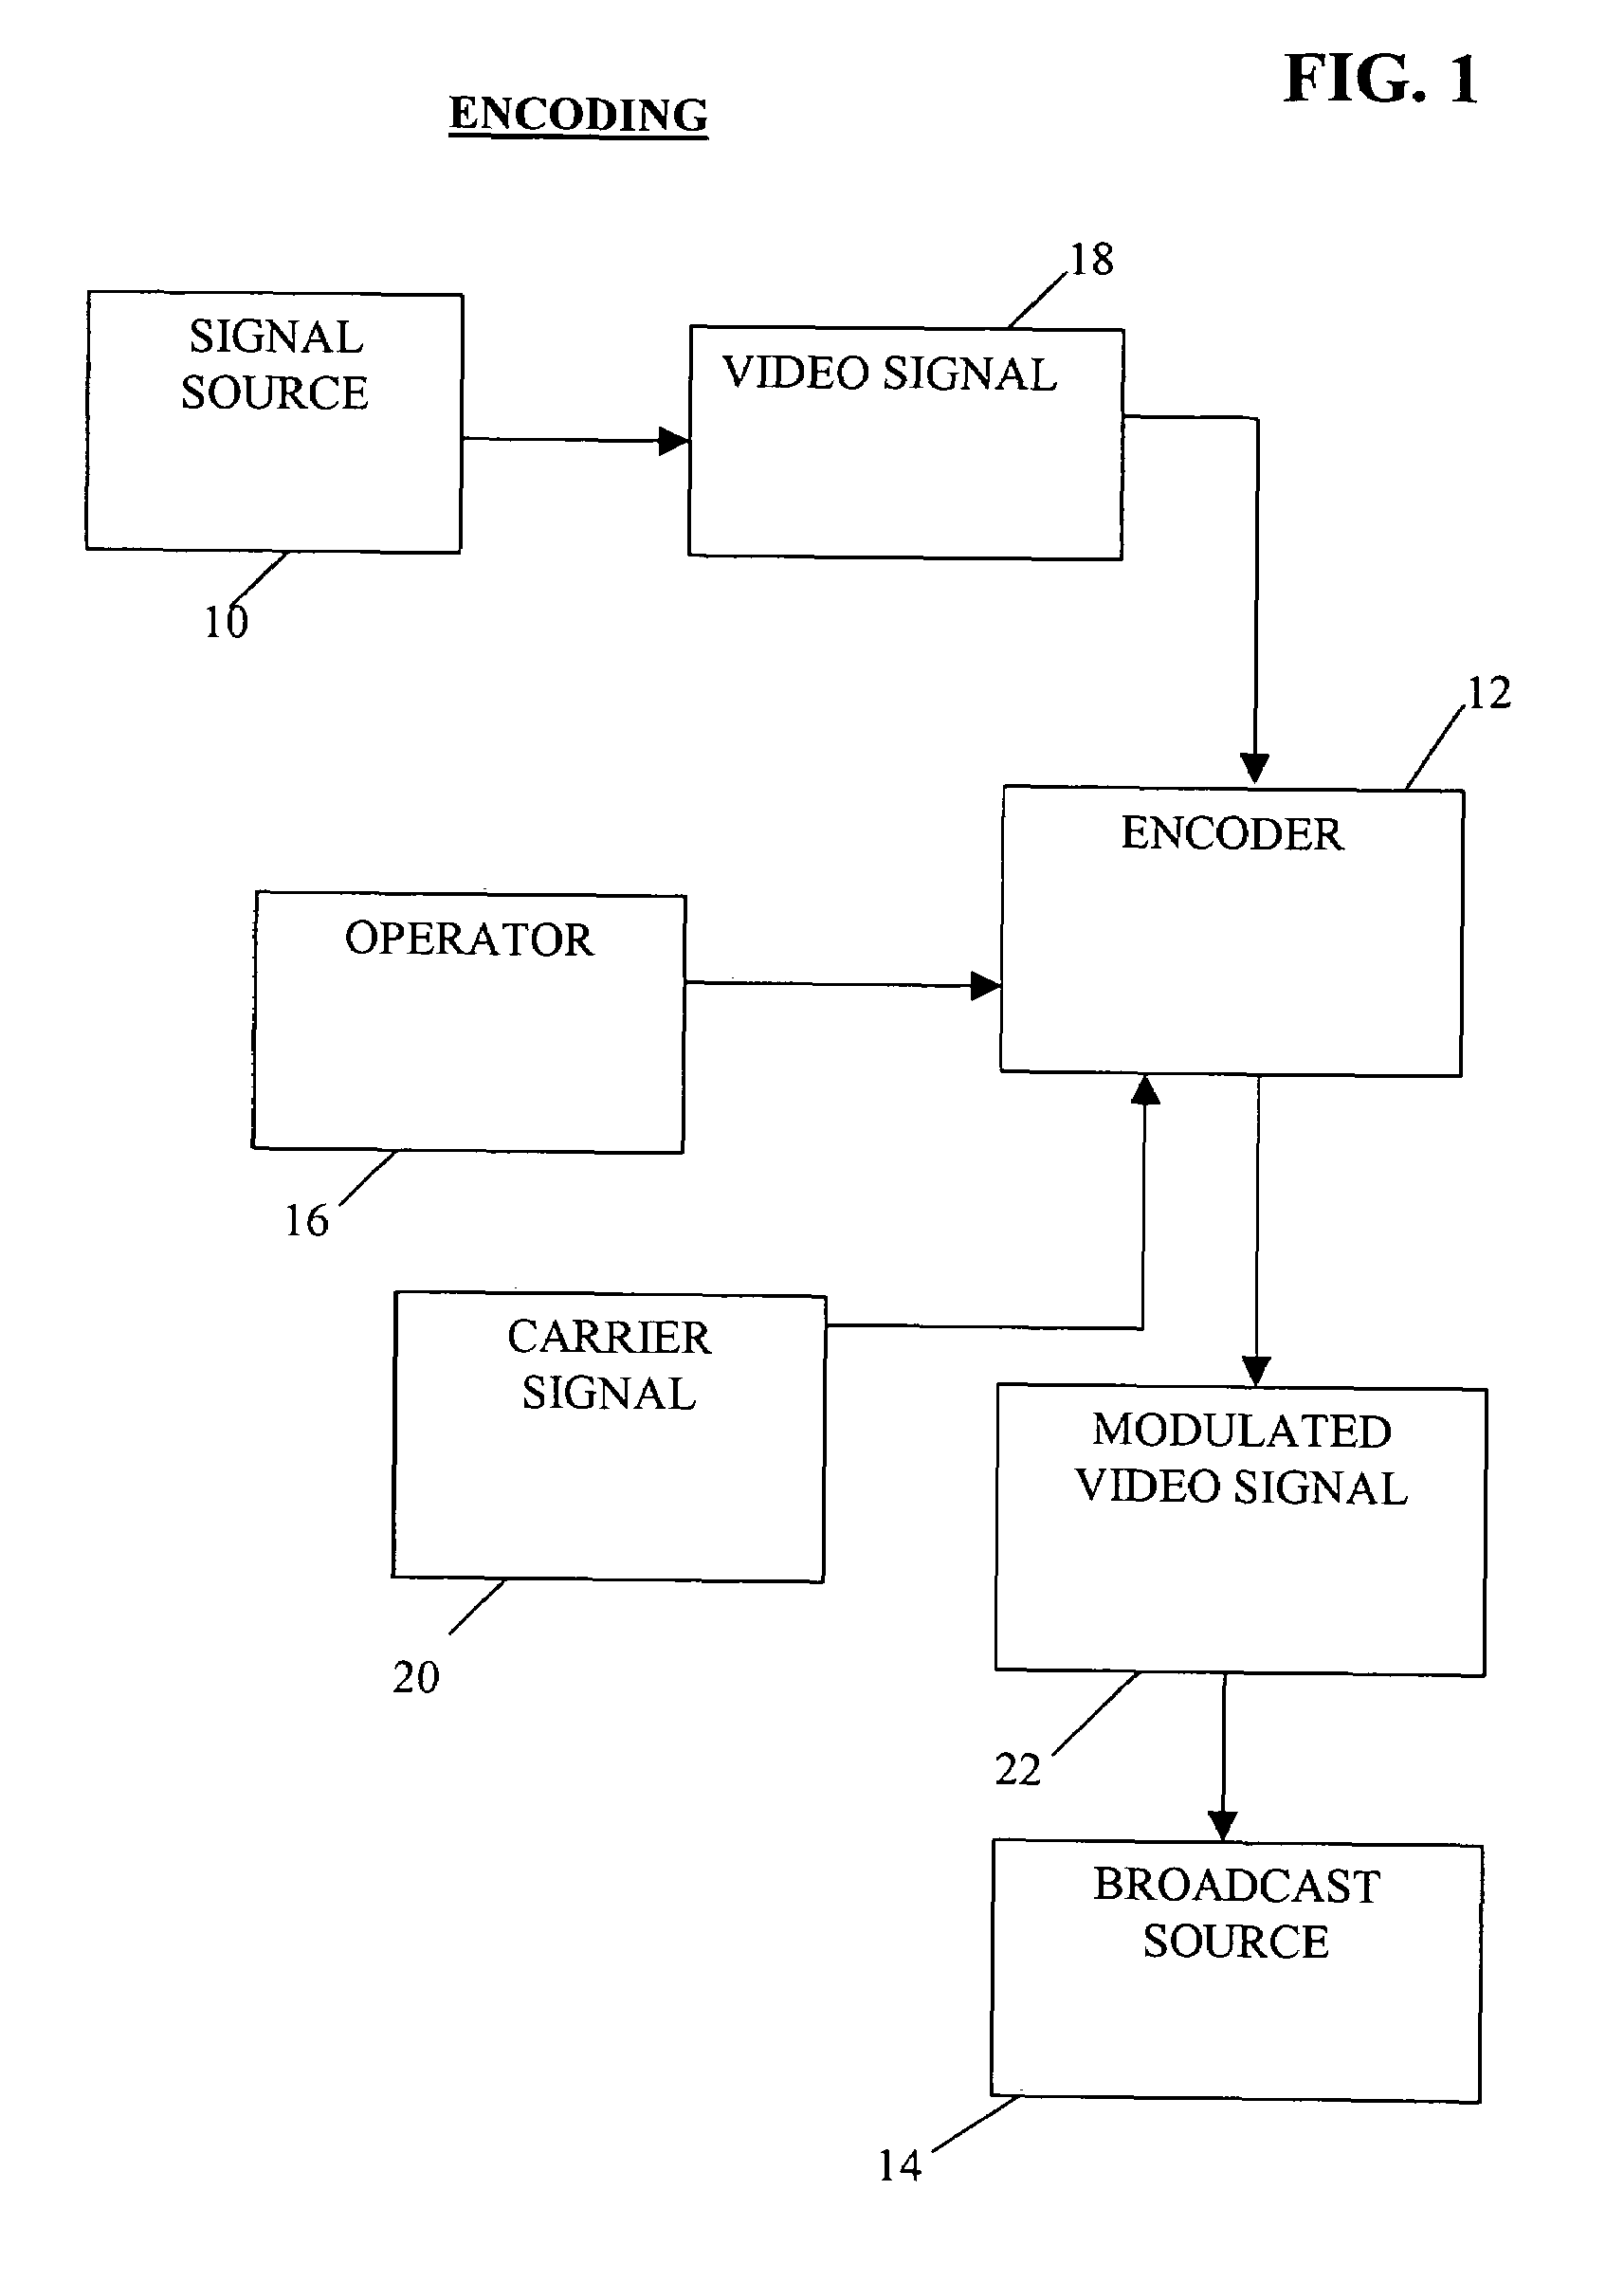 Method and system of detecting signal presence from a video signal presented on a digital display device